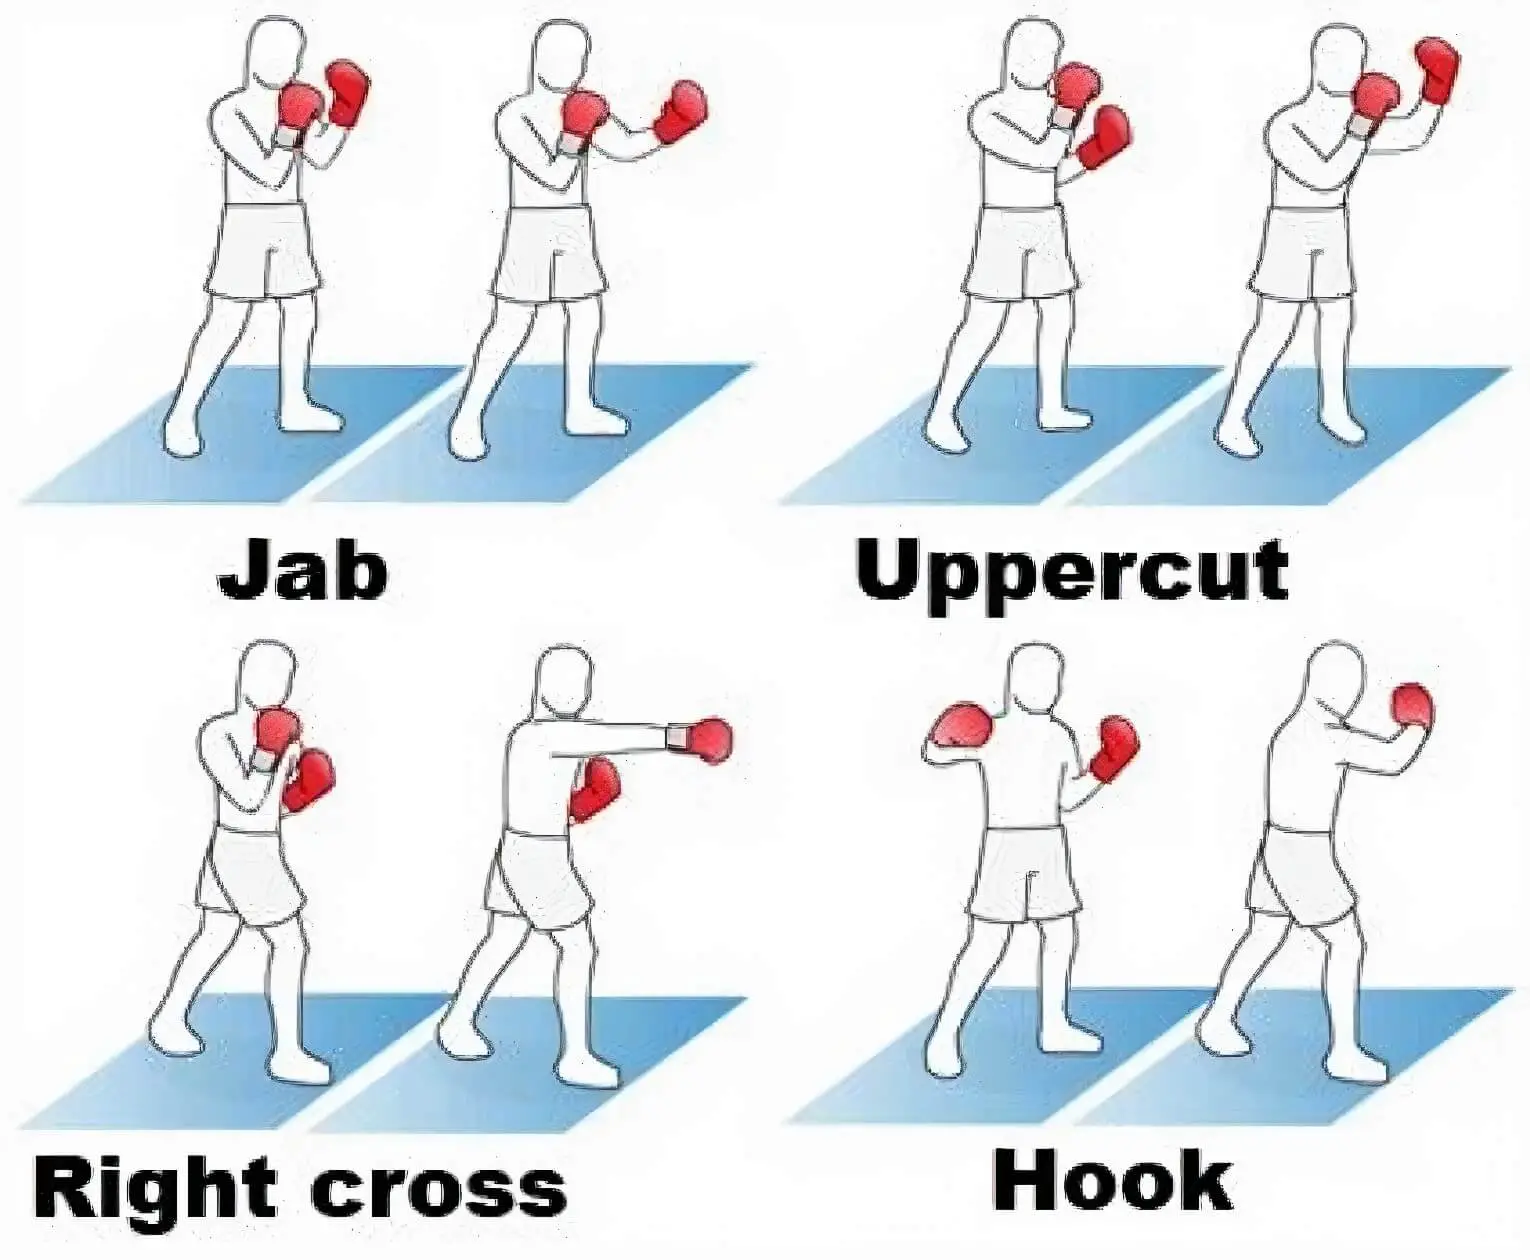 the basic punch combinations that we discuss in this section